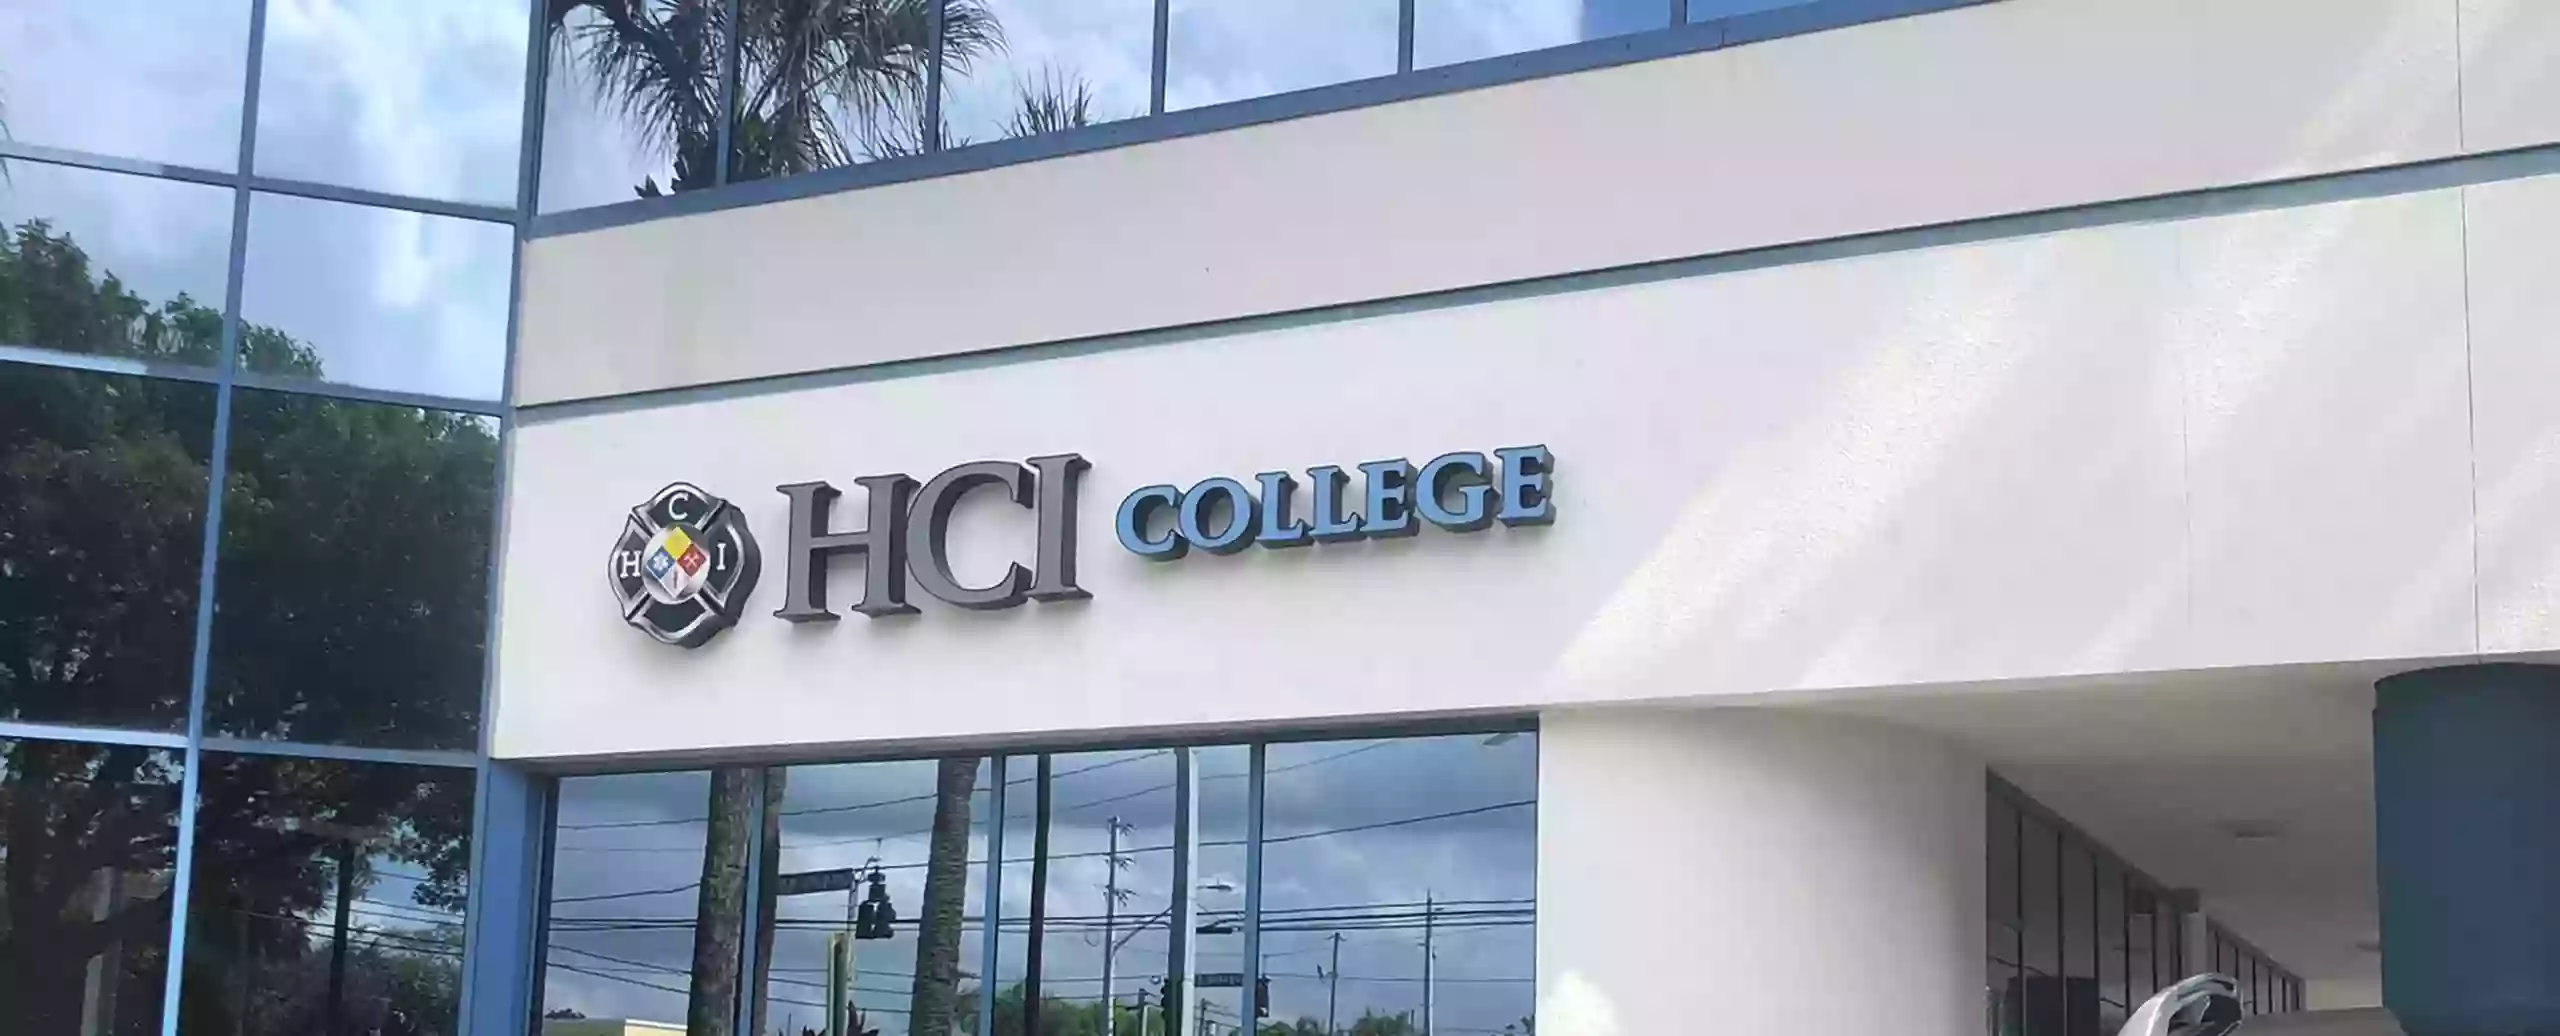 HCI College - Admissions Office